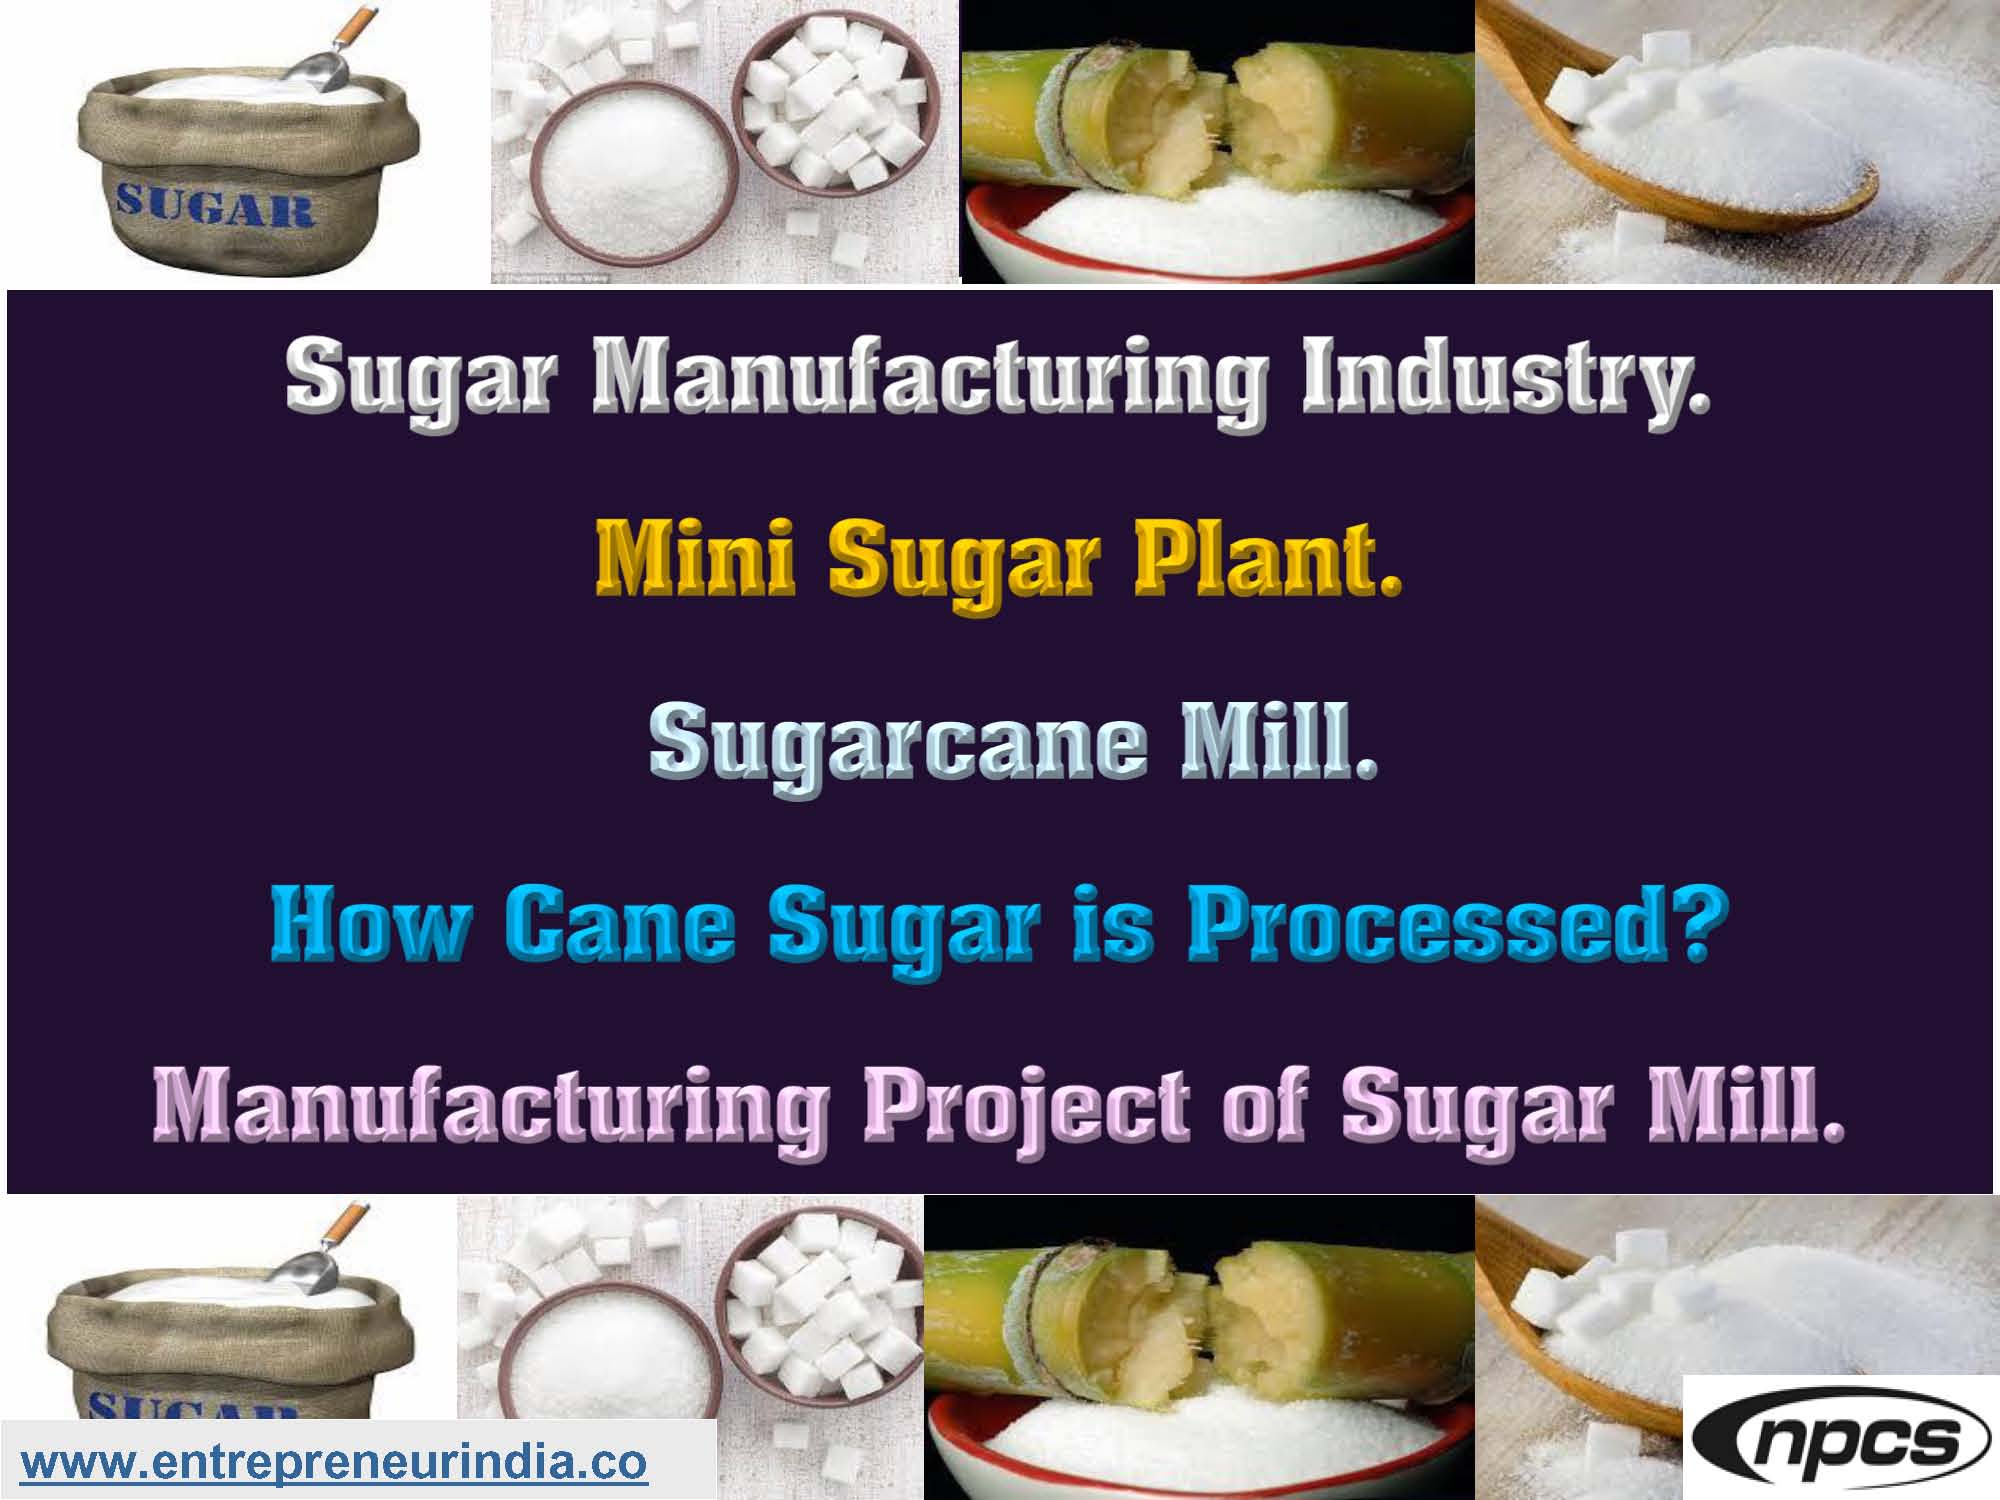 Sugar Manufacturing Industry